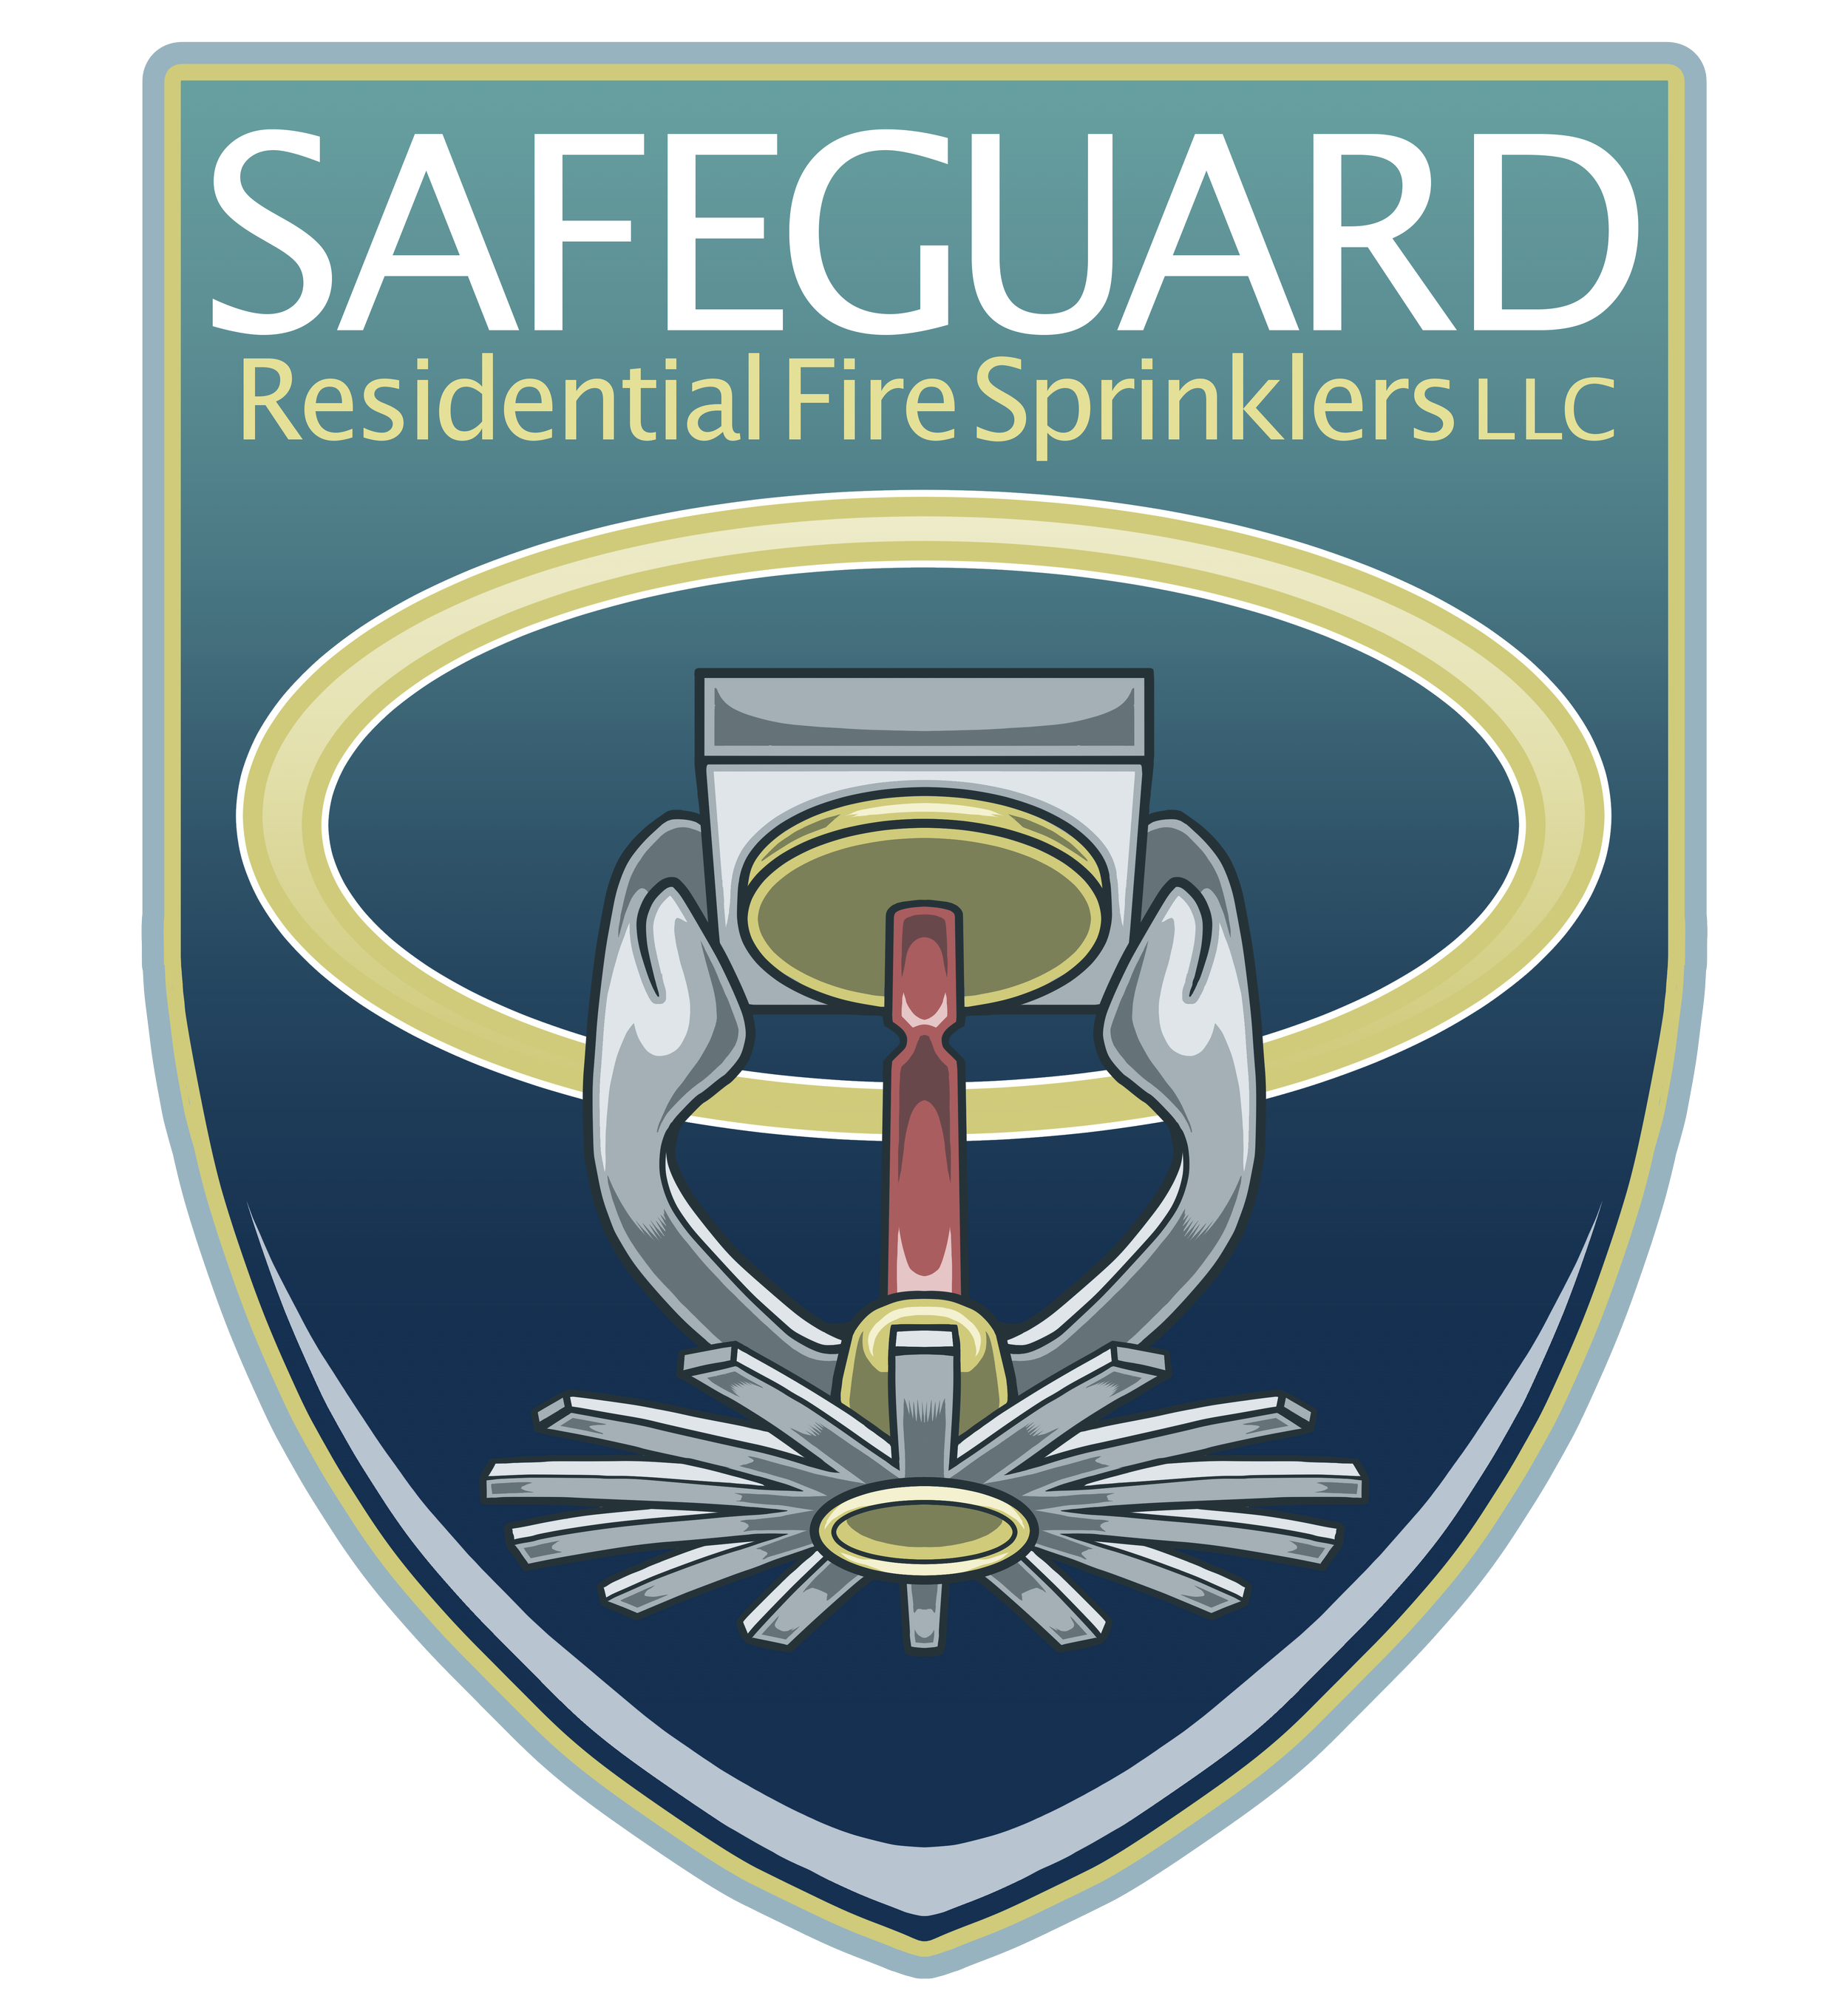 Residential Fire Sprinkler Services in Maryland | Fire Protection Service